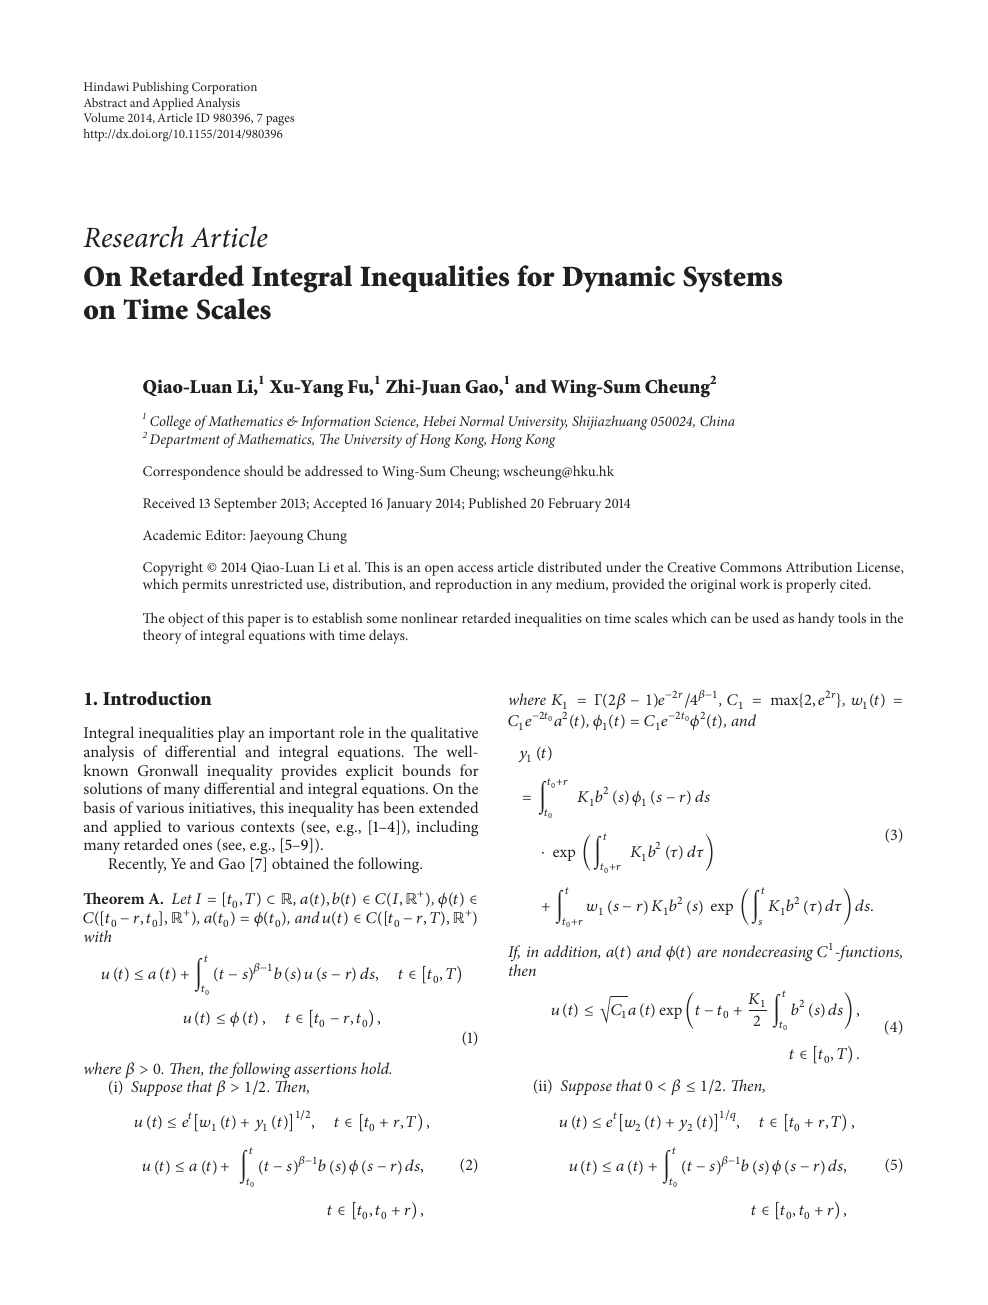 On Retarded Integral Inequalities For Dynamic Systems On Time Scales Topic Of Research Paper In Mathematics Download Scholarly Article Pdf And Read For Free On Cyberleninka Open Science Hub